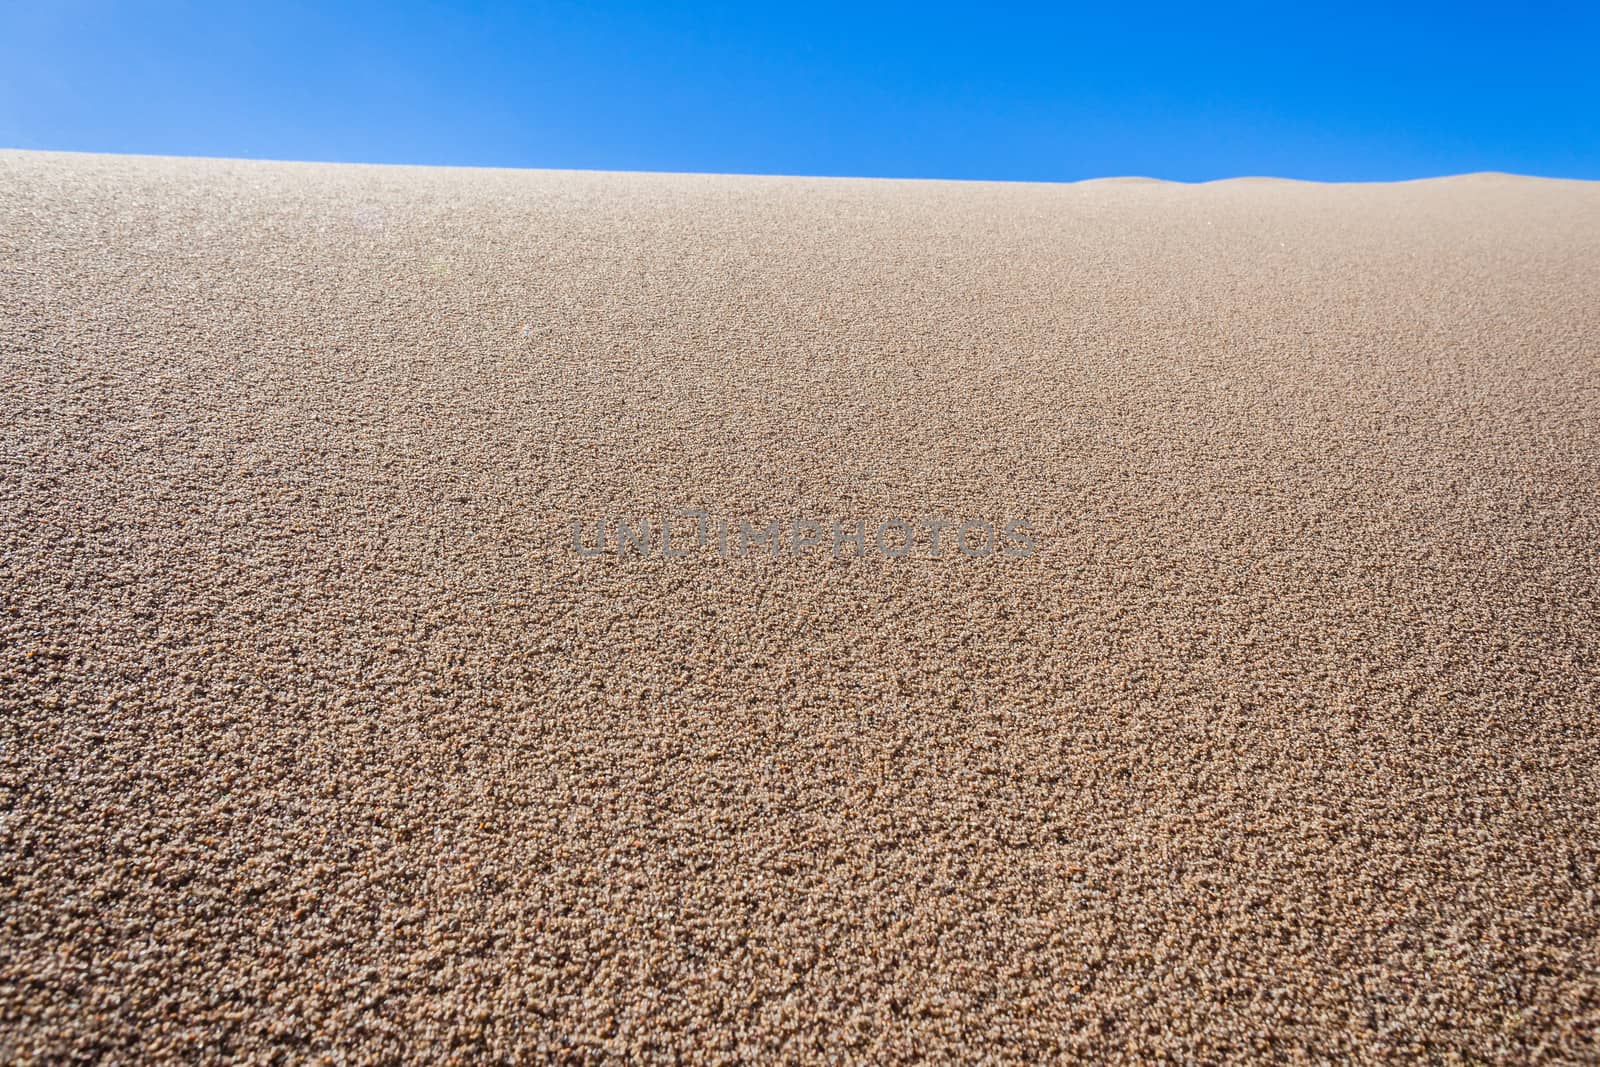 Close photo detail of beach sand grains blown by winds on the ocean coastline.